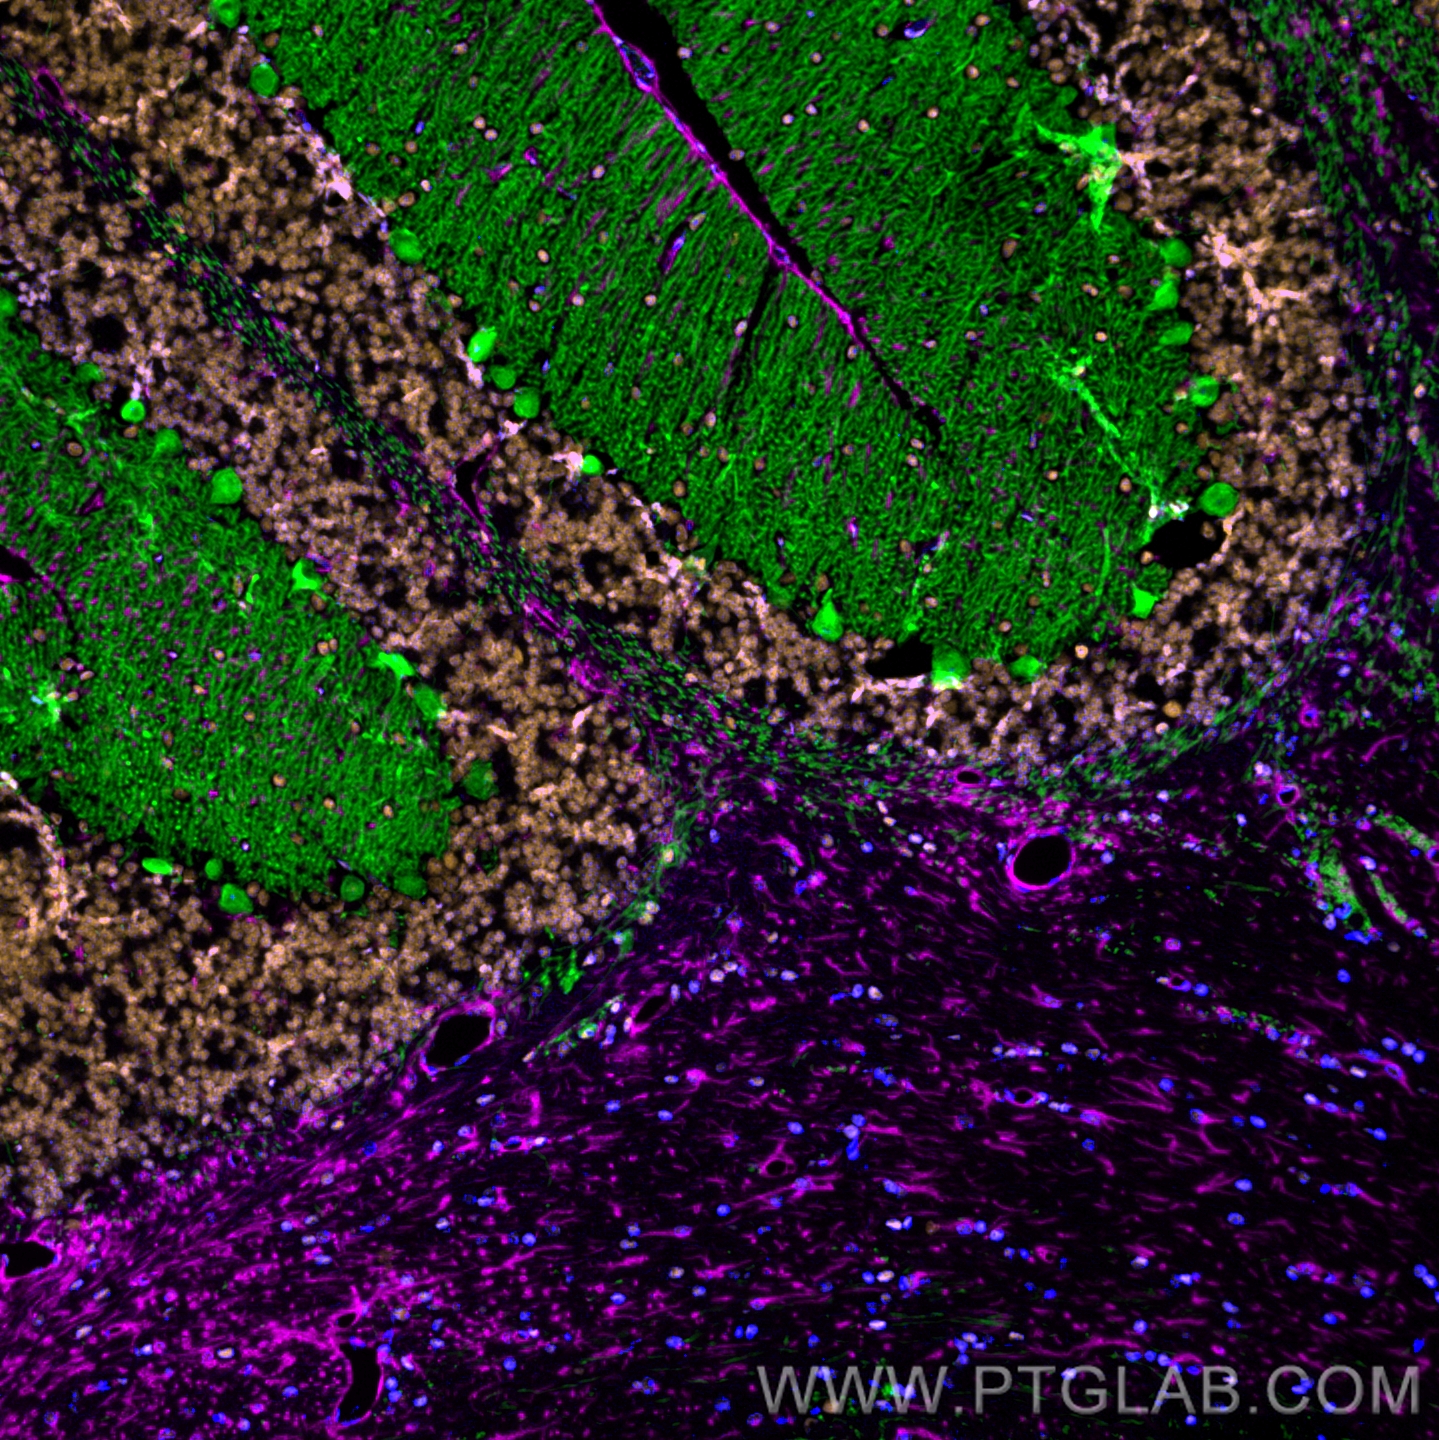 Immunofluorescence of mouse cerebellum: FFPE mouse cerebellum sections were stained with anti-Calbindin antibody (14479-1-AP, green) labeled with FlexAble HRP Antibody Labeling Kit for Rabbit IgG (KFA005) and Tyramide-488, anti-FUS antibody (68262-1-Ig, orange) labeled with FlexAble HRP Antibody Labeling Kit for Mouse IgG1 (KFA025) and Tyramide-555, and anti-GFAP antibody (60190-1-Ig, magenta) labeled with FlexAble HRP Antibody Labeling Kit for Mouse IgG2a (KFA045) and Tyramide-650. Cell nuclei are in blue.